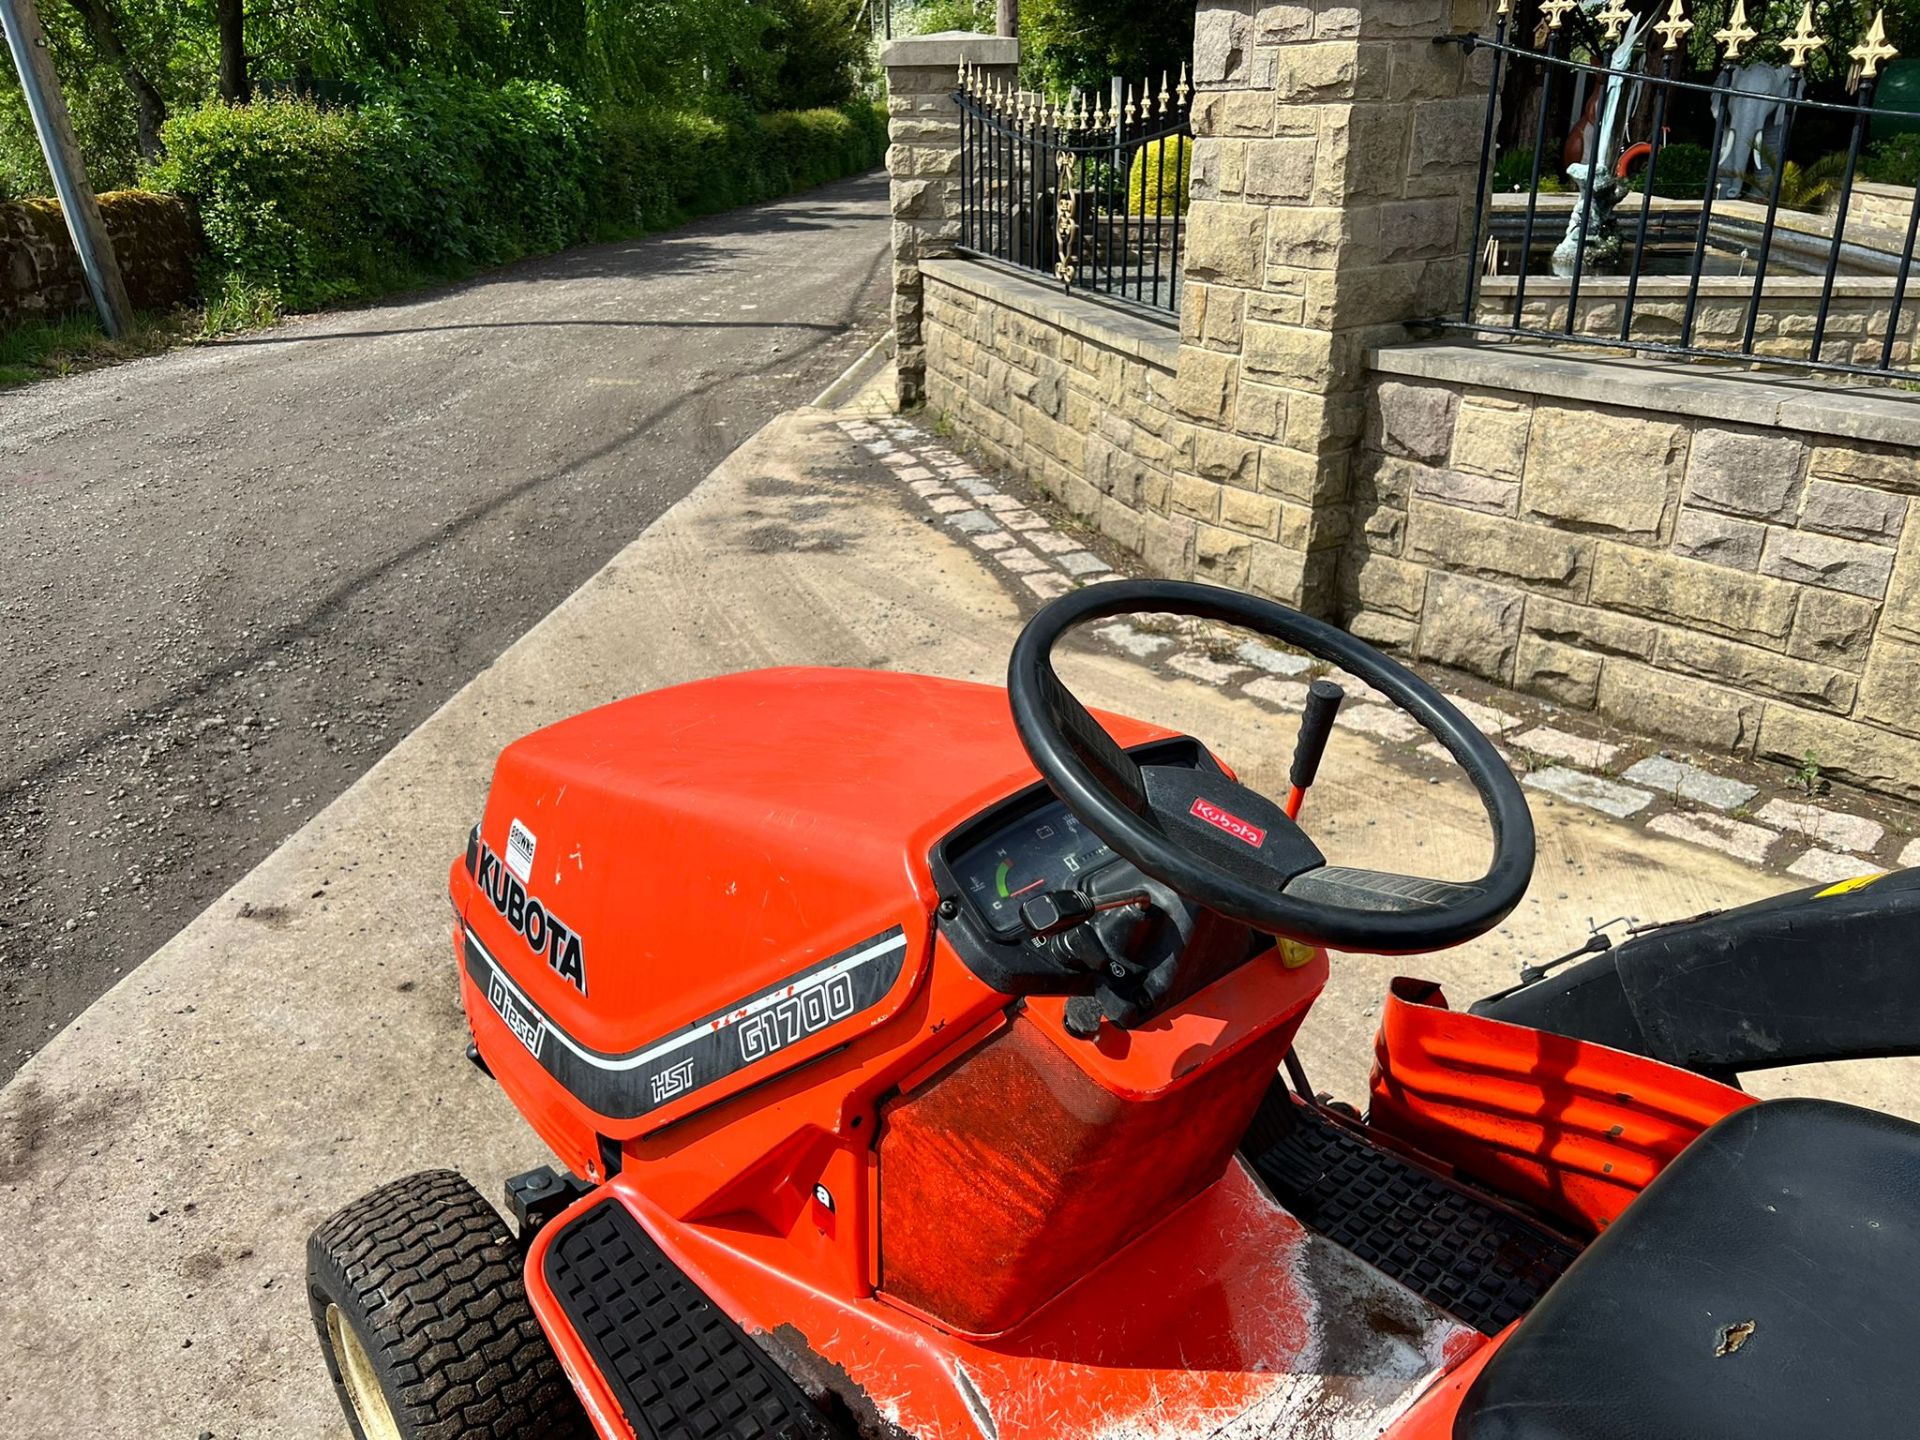 Kubota G1700 Diesel Ride On Mower With Rear Collector, Runs Drives And Cuts "NOVAT" - Image 8 of 12